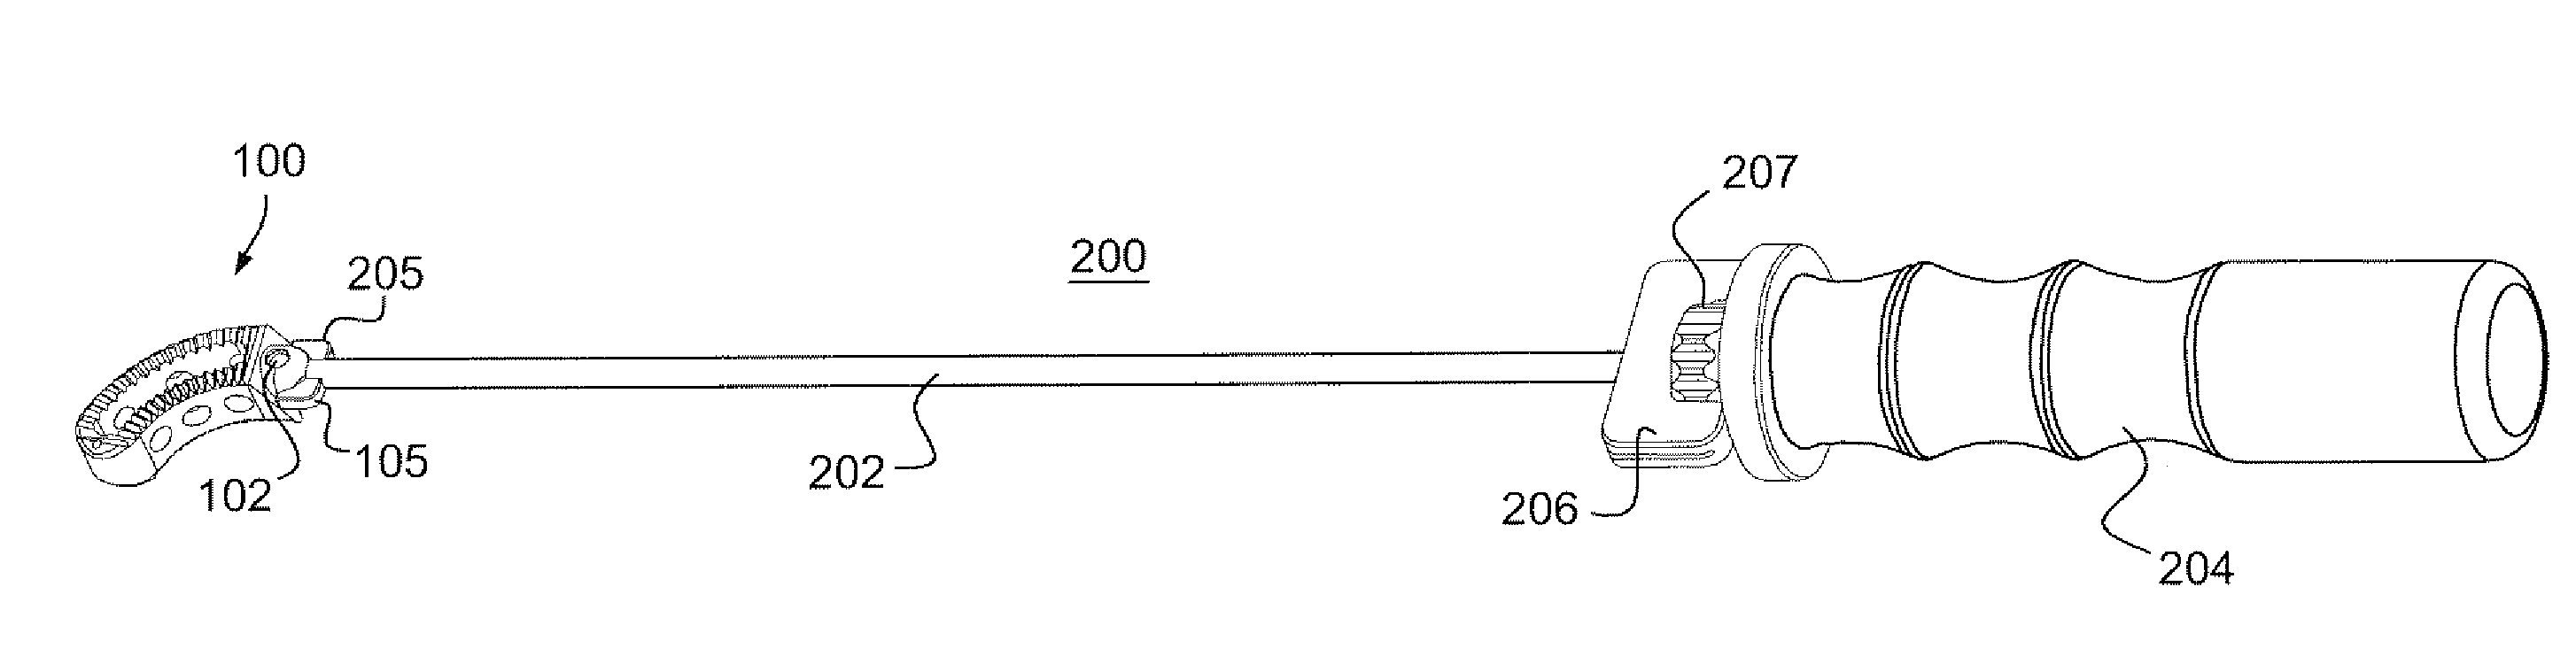 Steerable spine implant insertion device and method